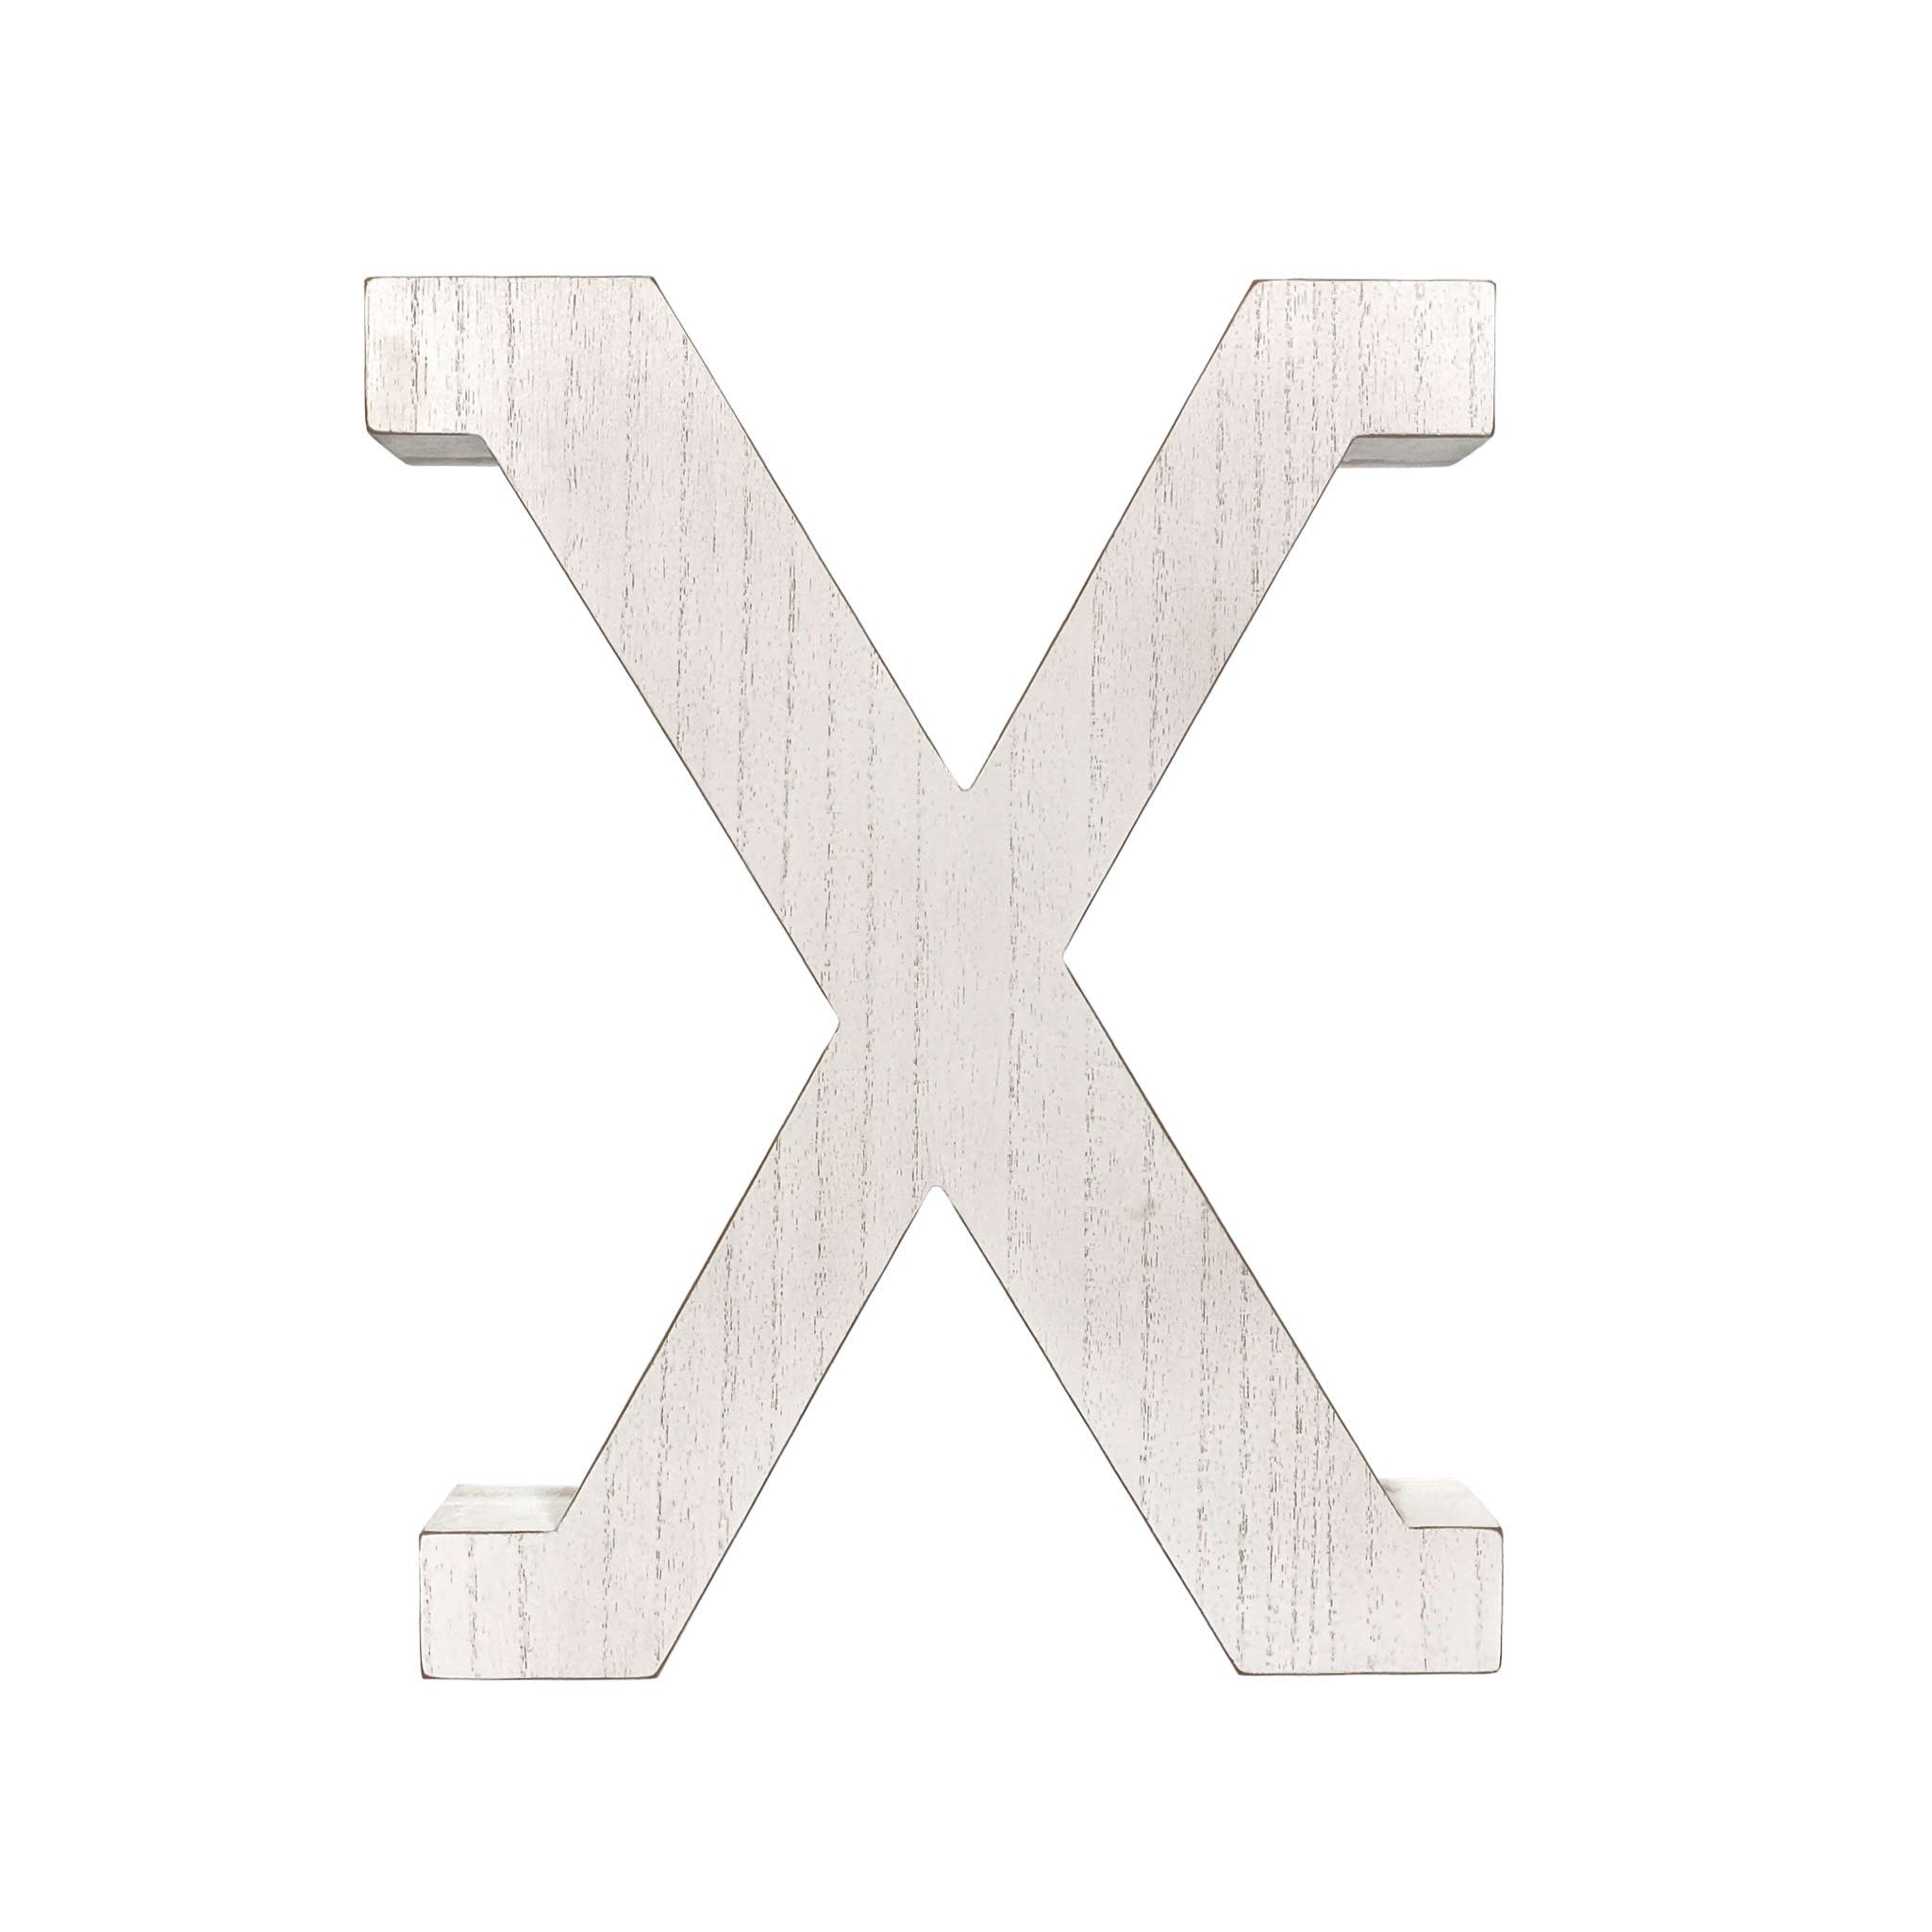 16" Distressed White Wash Wooden Initial Letter X Sculpture